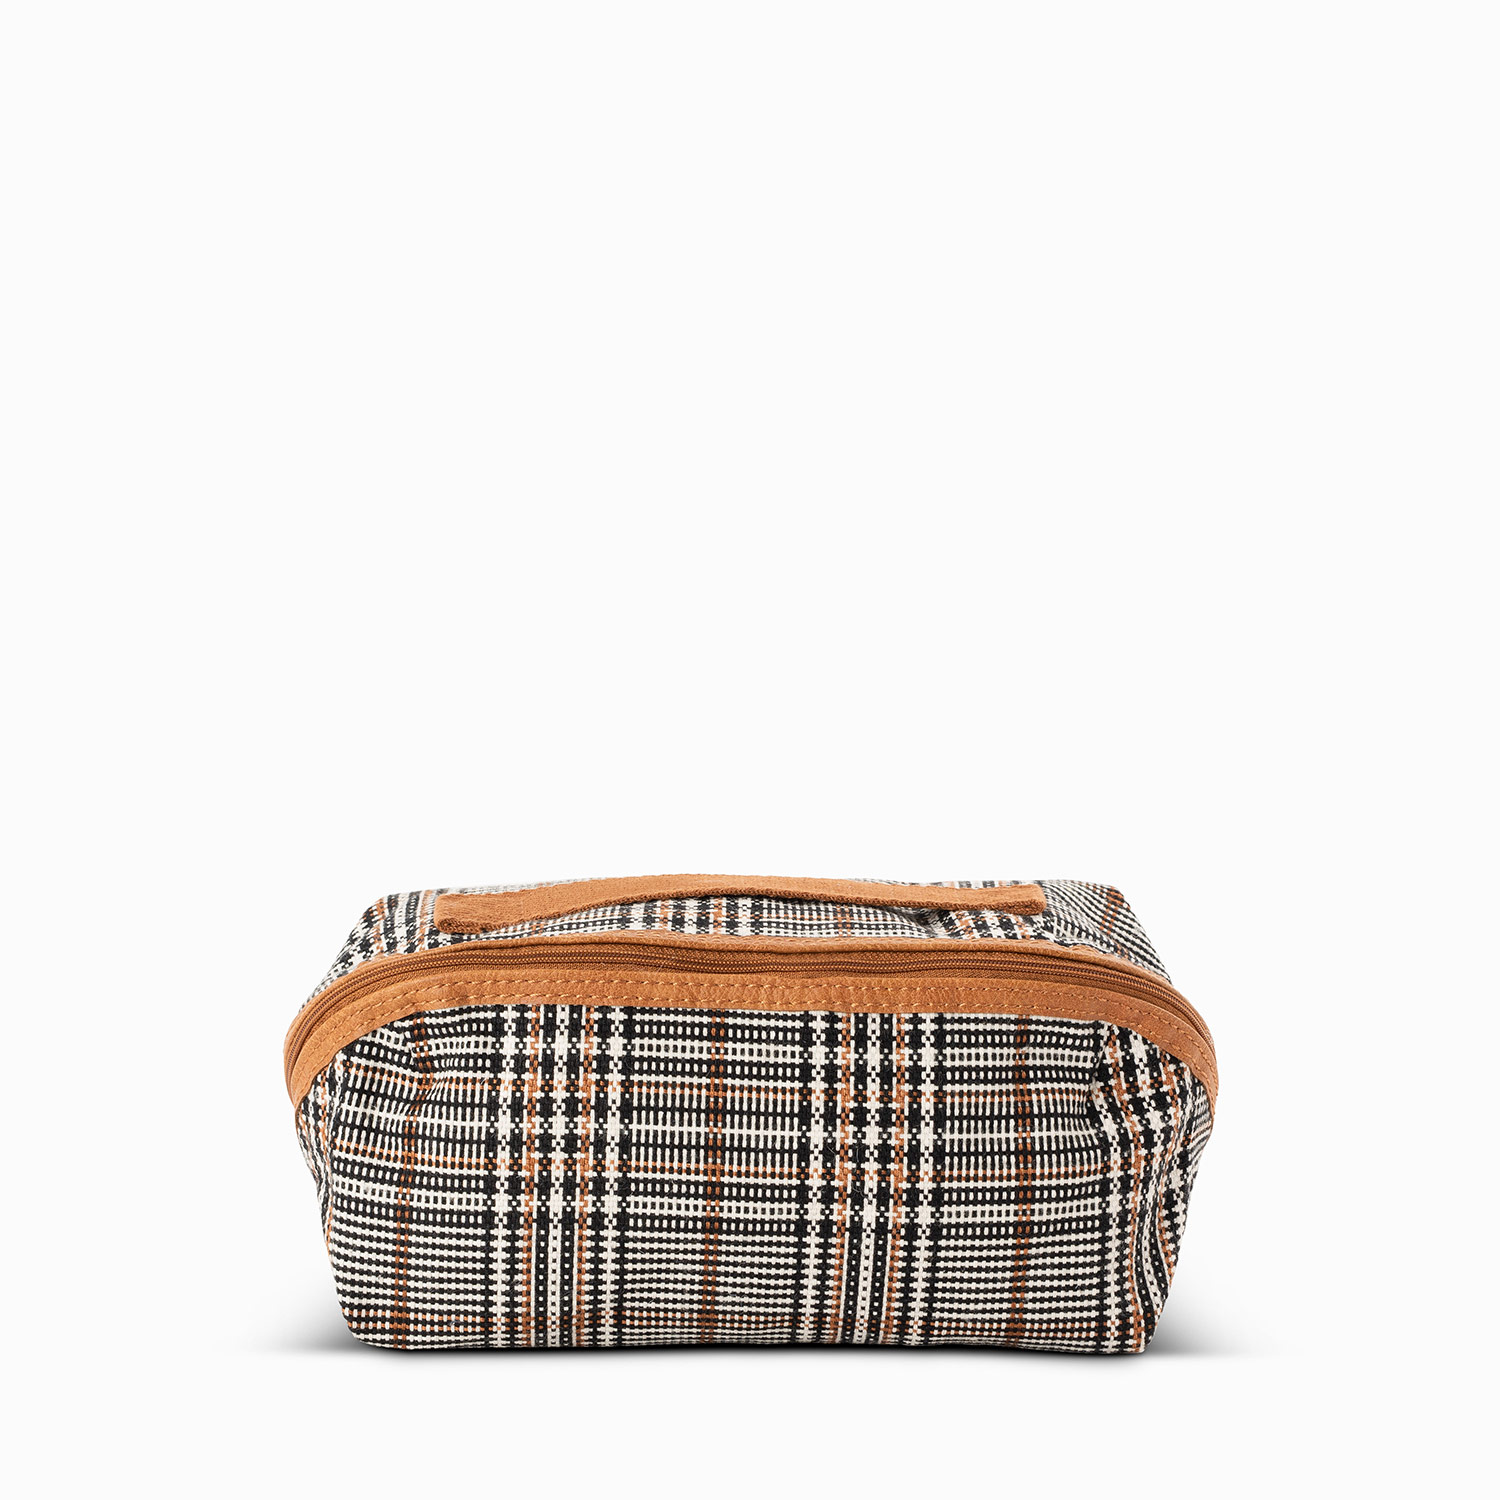 Plaid About You Weave - Expanding Travel Case - Thirty-One Gifts -  Affordable Purses, Totes & Bags